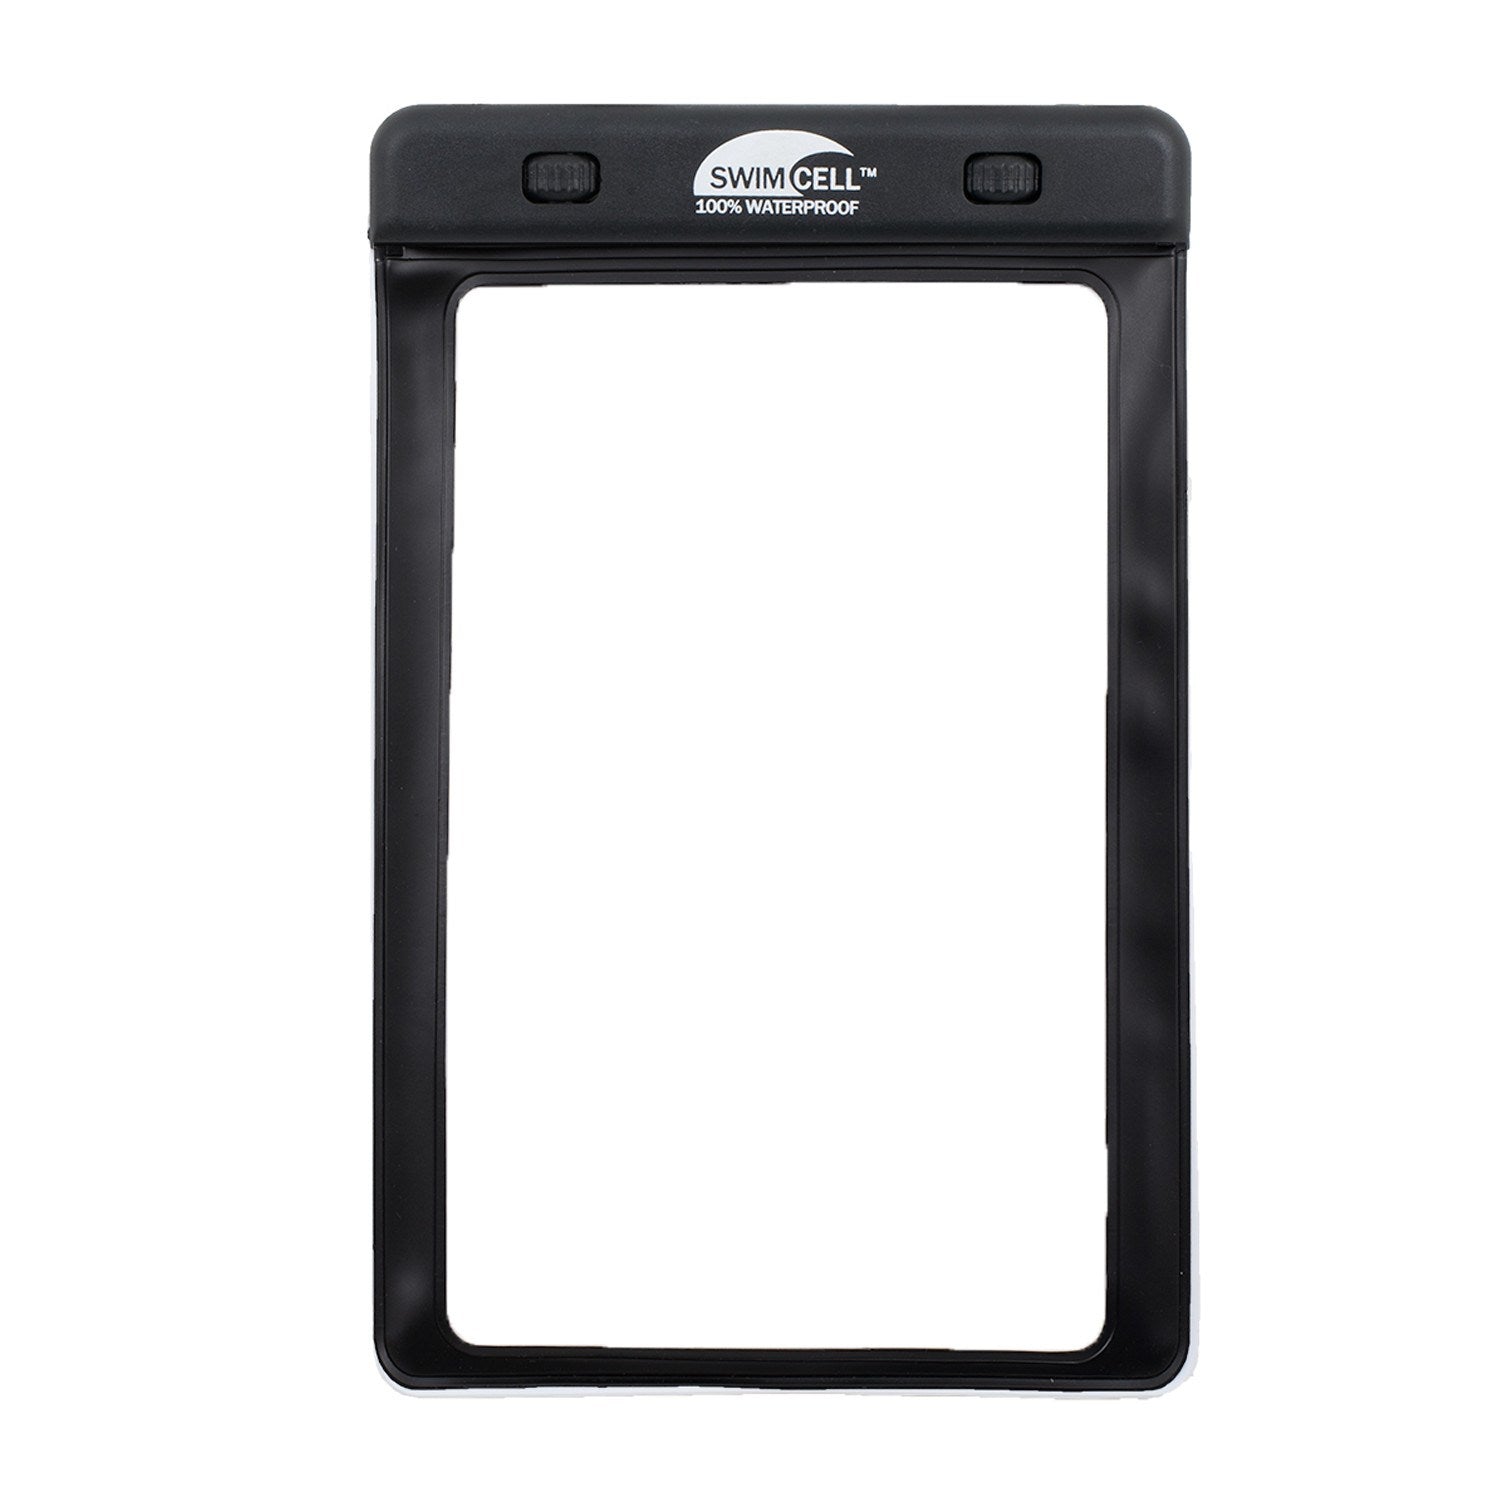 SwimCell Waterproof Tablet Case - Small (up to 15 x 21cm)